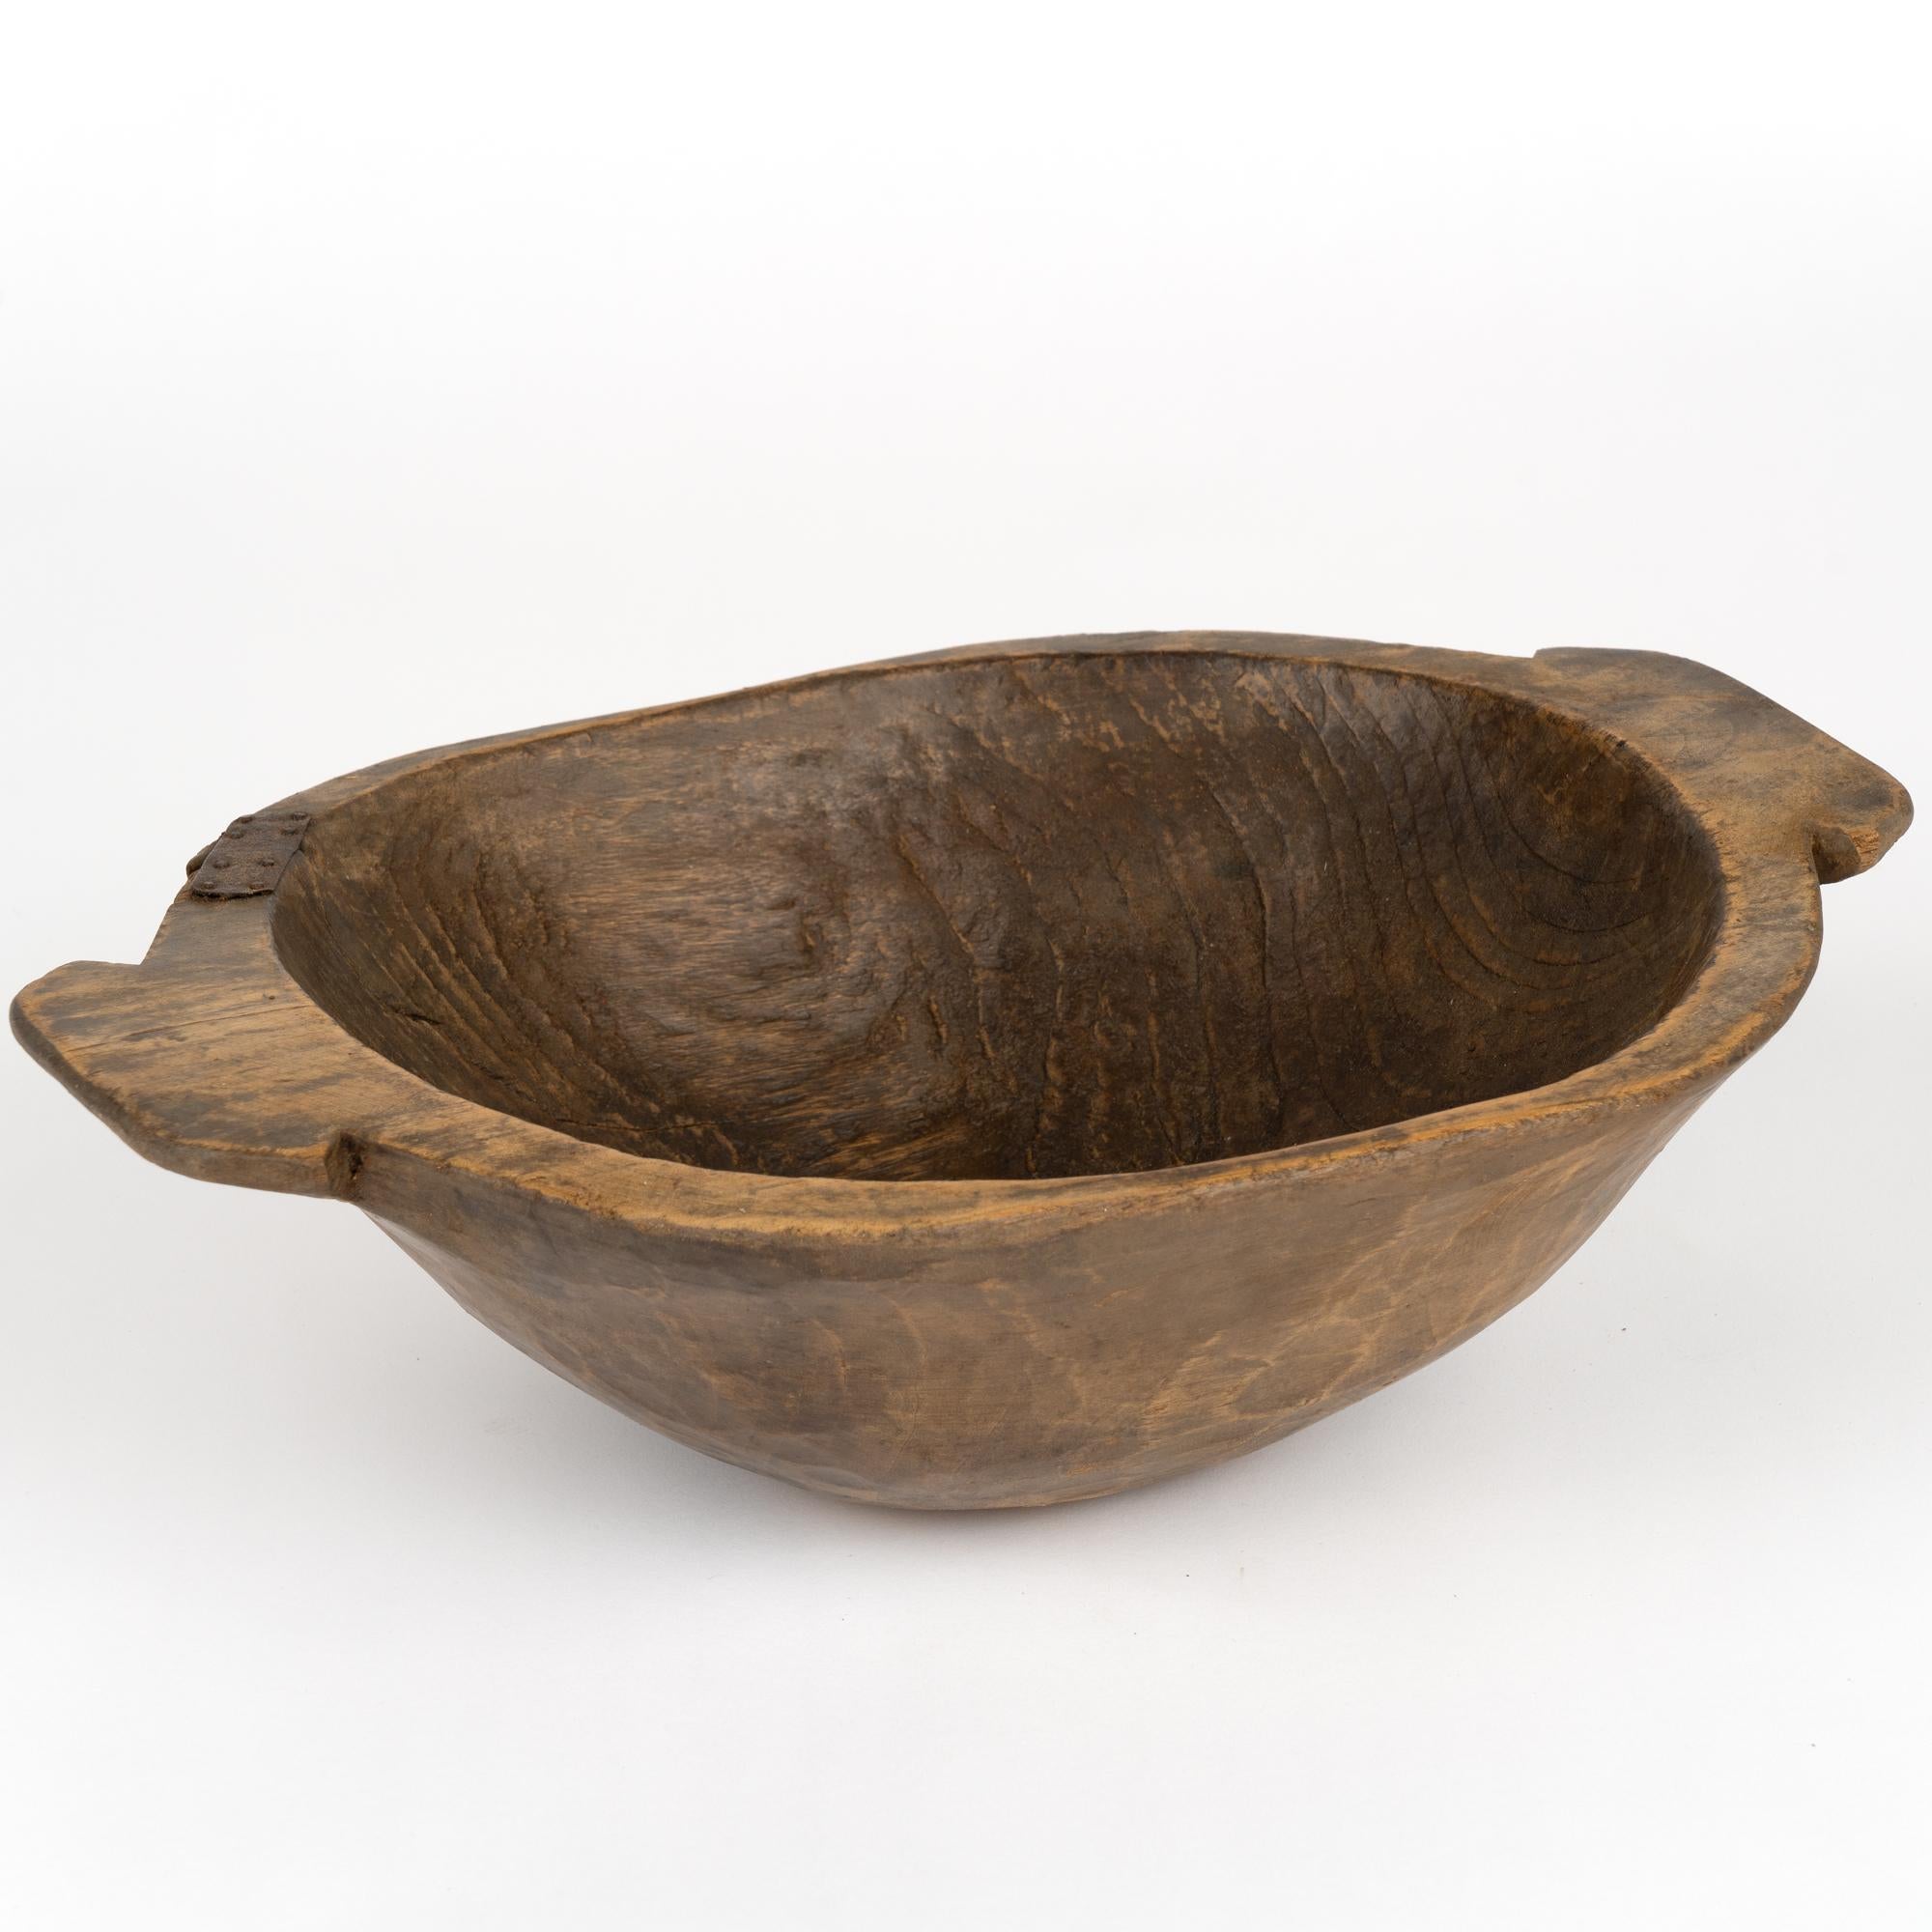 Antique hand-hewn wooden bowl with carved handles and typical old metal repair to strengthen bowl where crack began. Wonderful deep patina.
Old cracks, nicks, stains, distress are reflective of generations of use. 
Waxed and ready to use as